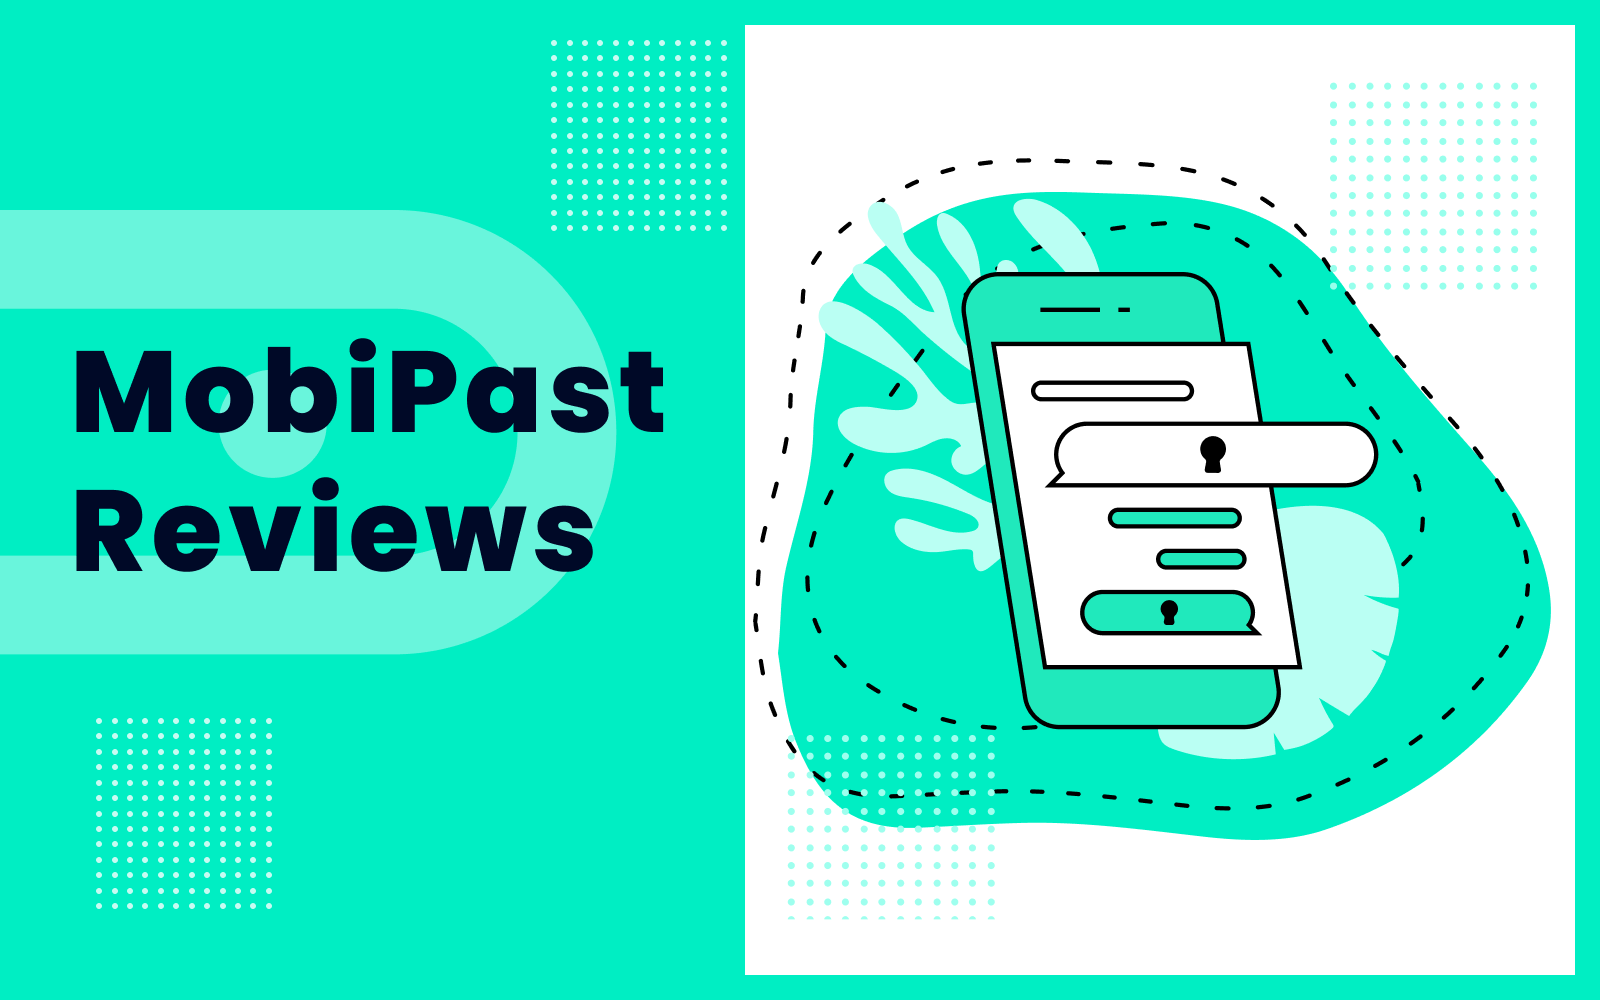 MobiPast Reviews 2022: What You Need to Know